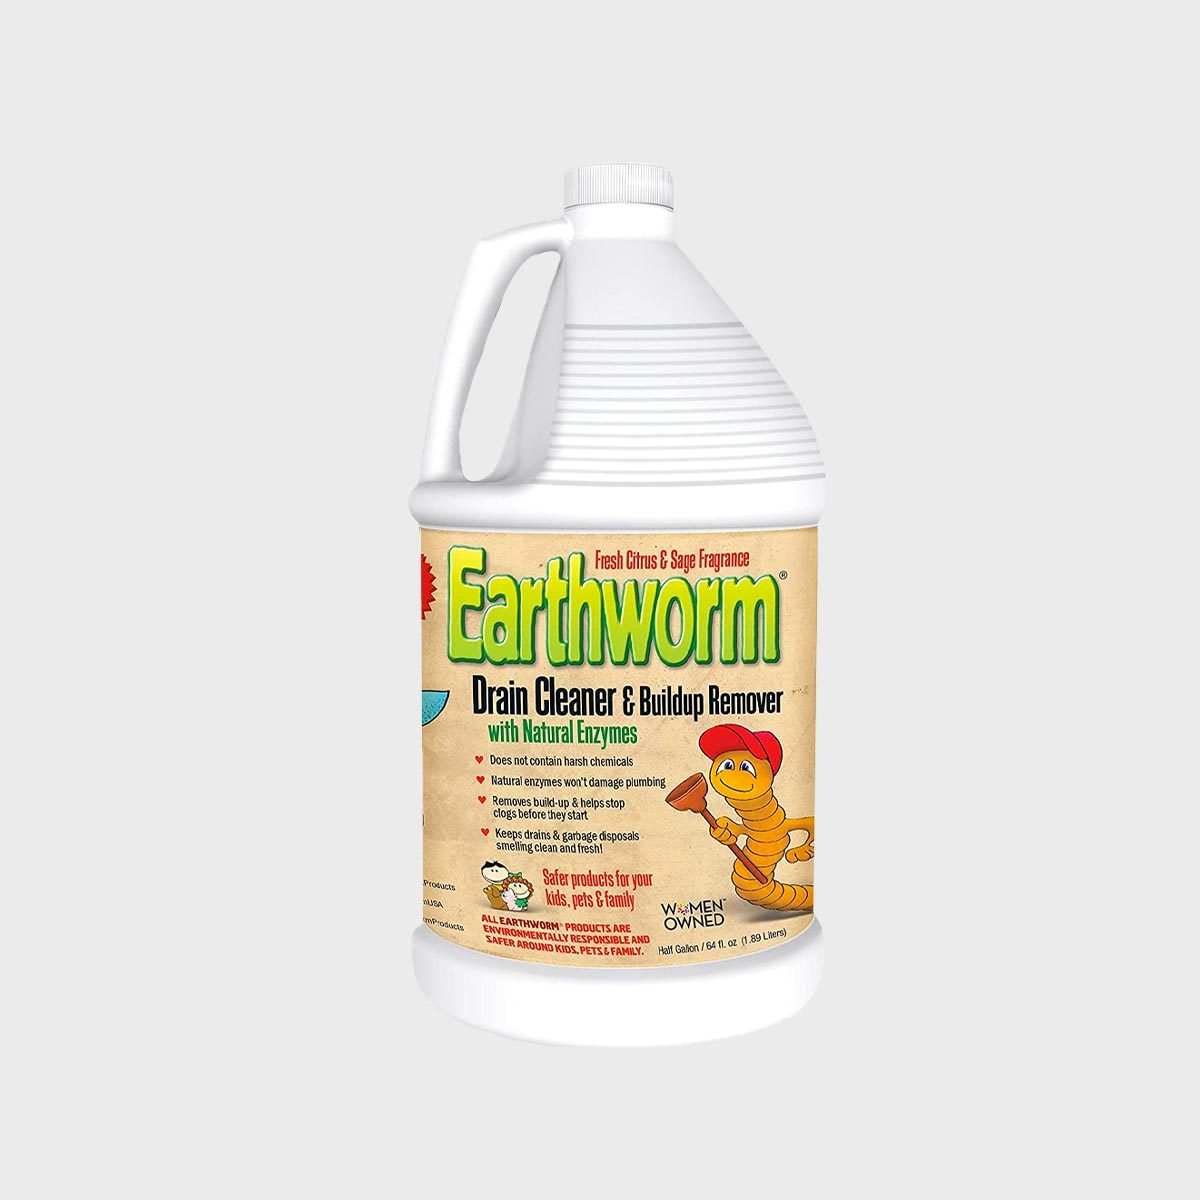 https://www.rd.com/wp-content/uploads/2021/11/Earthworm-Drain-Cleaner-and-Buildup-Remover-ecomm.jpg?fit=700%2C700